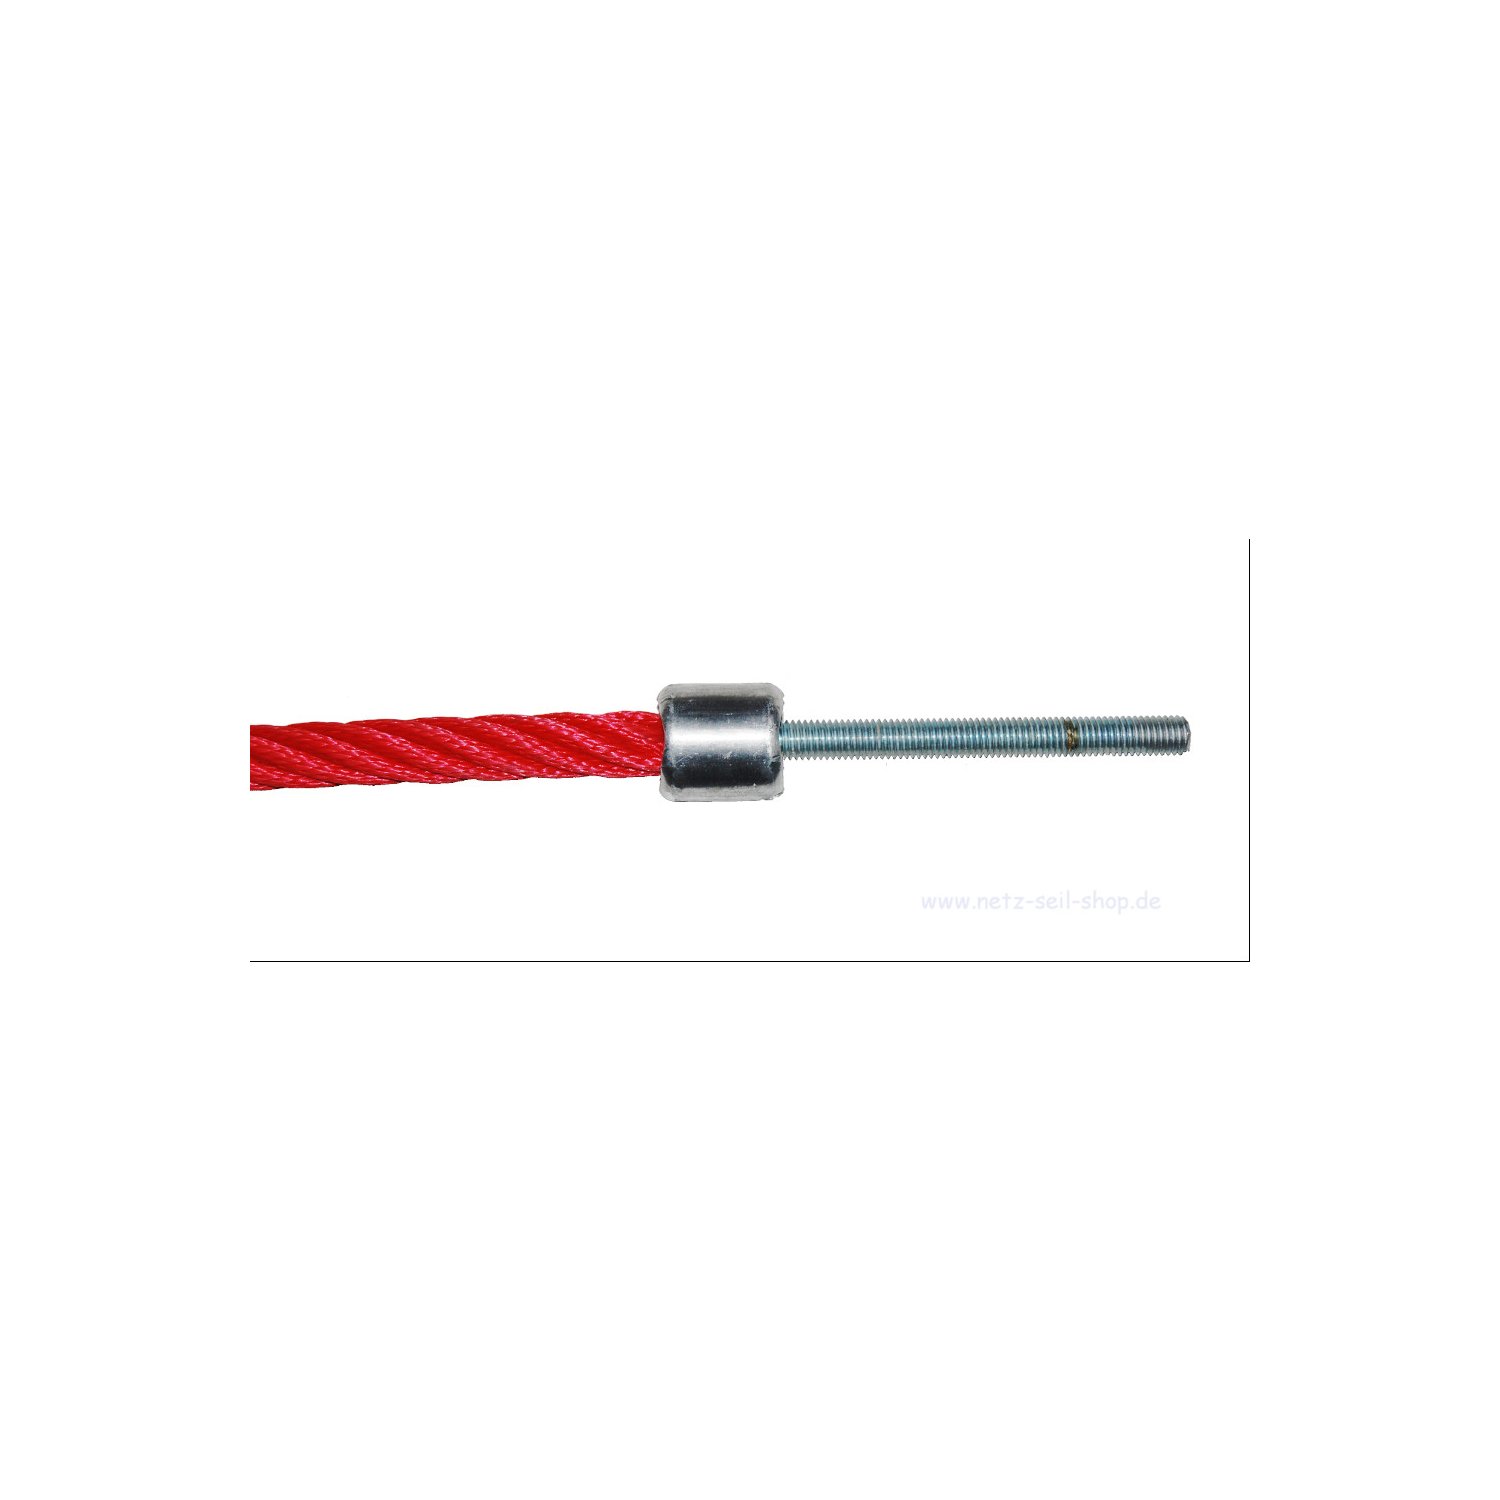 Threaded bolt M12 x 200 mm, galvanised, directly pressed [12,50 EUR]